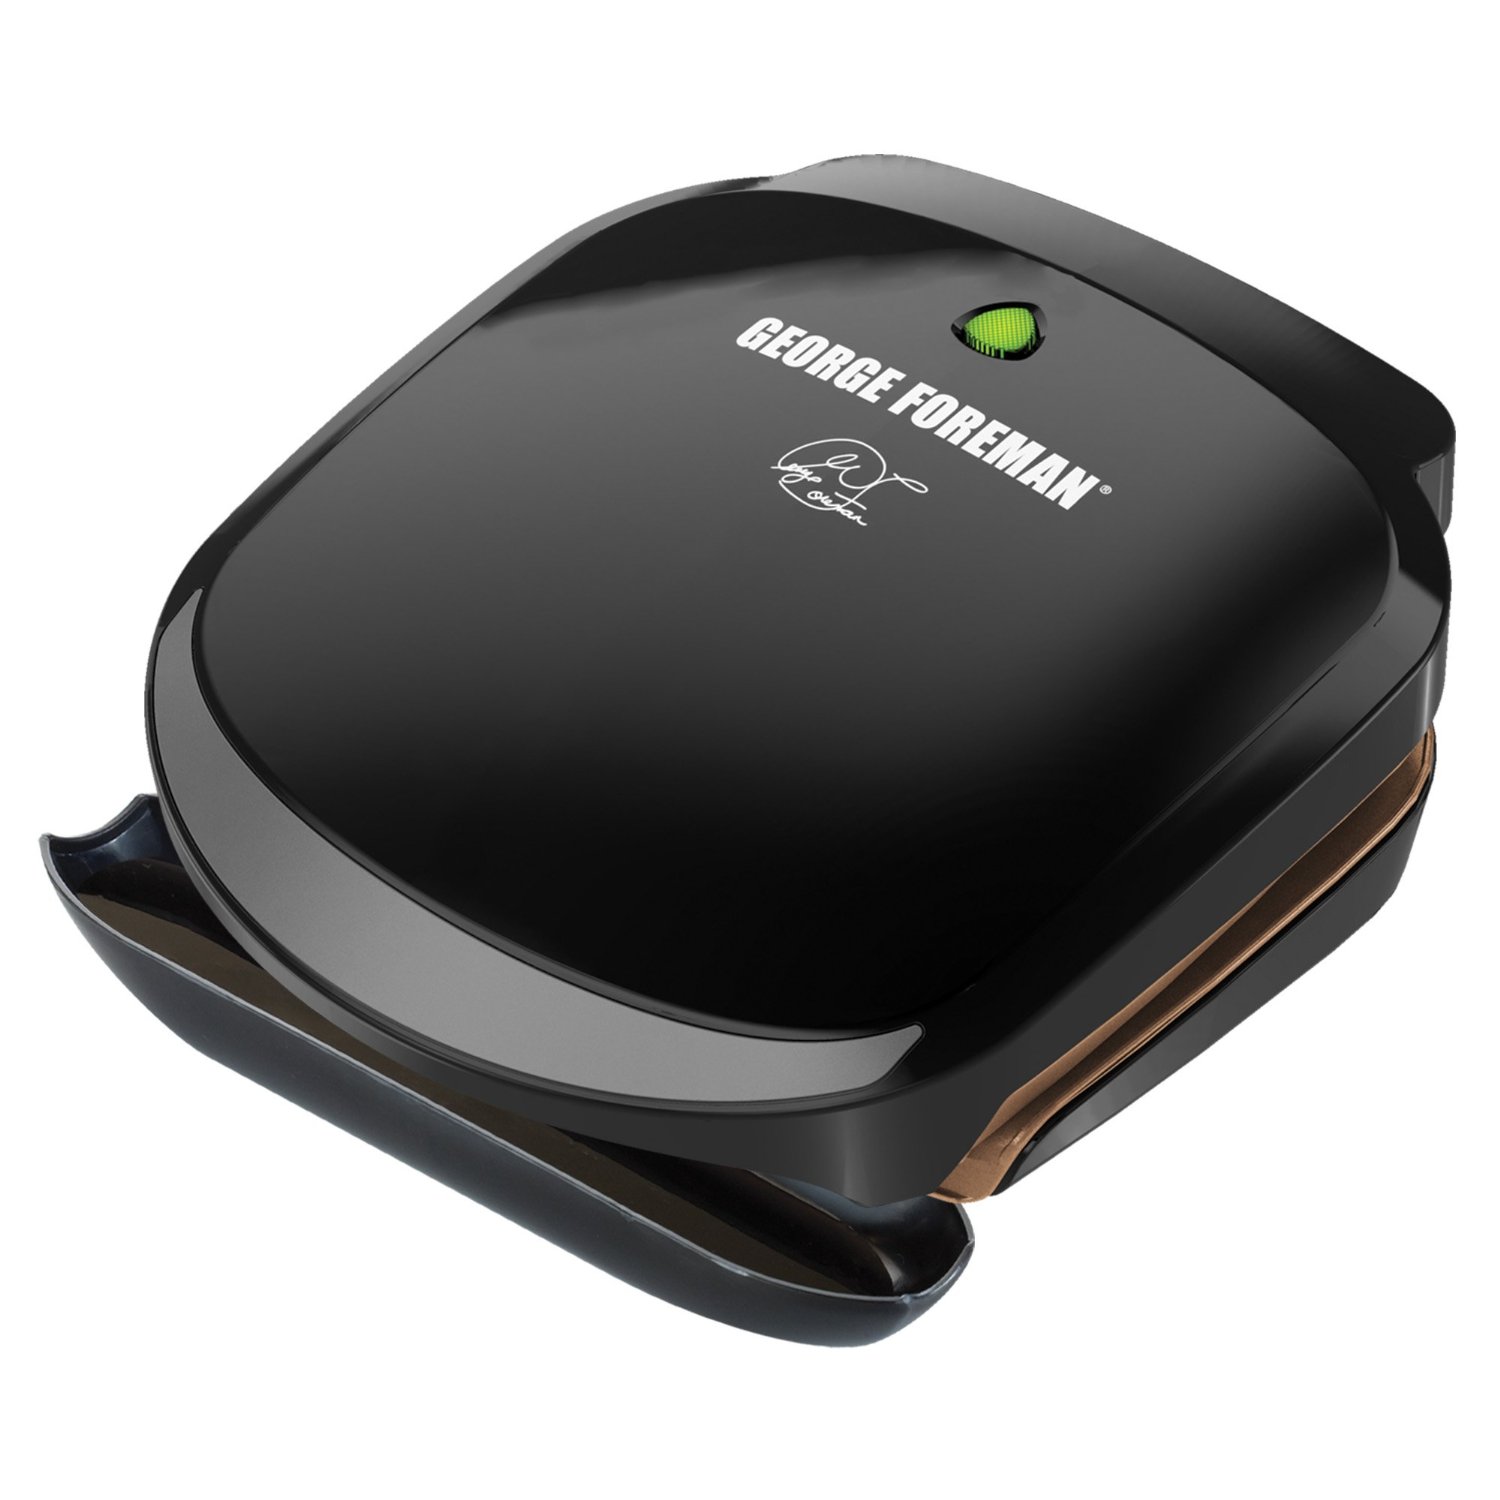 George Foreman 2-Serving Classic Plate Grill and Panini Press – Just $11.65! Back to Dorm!